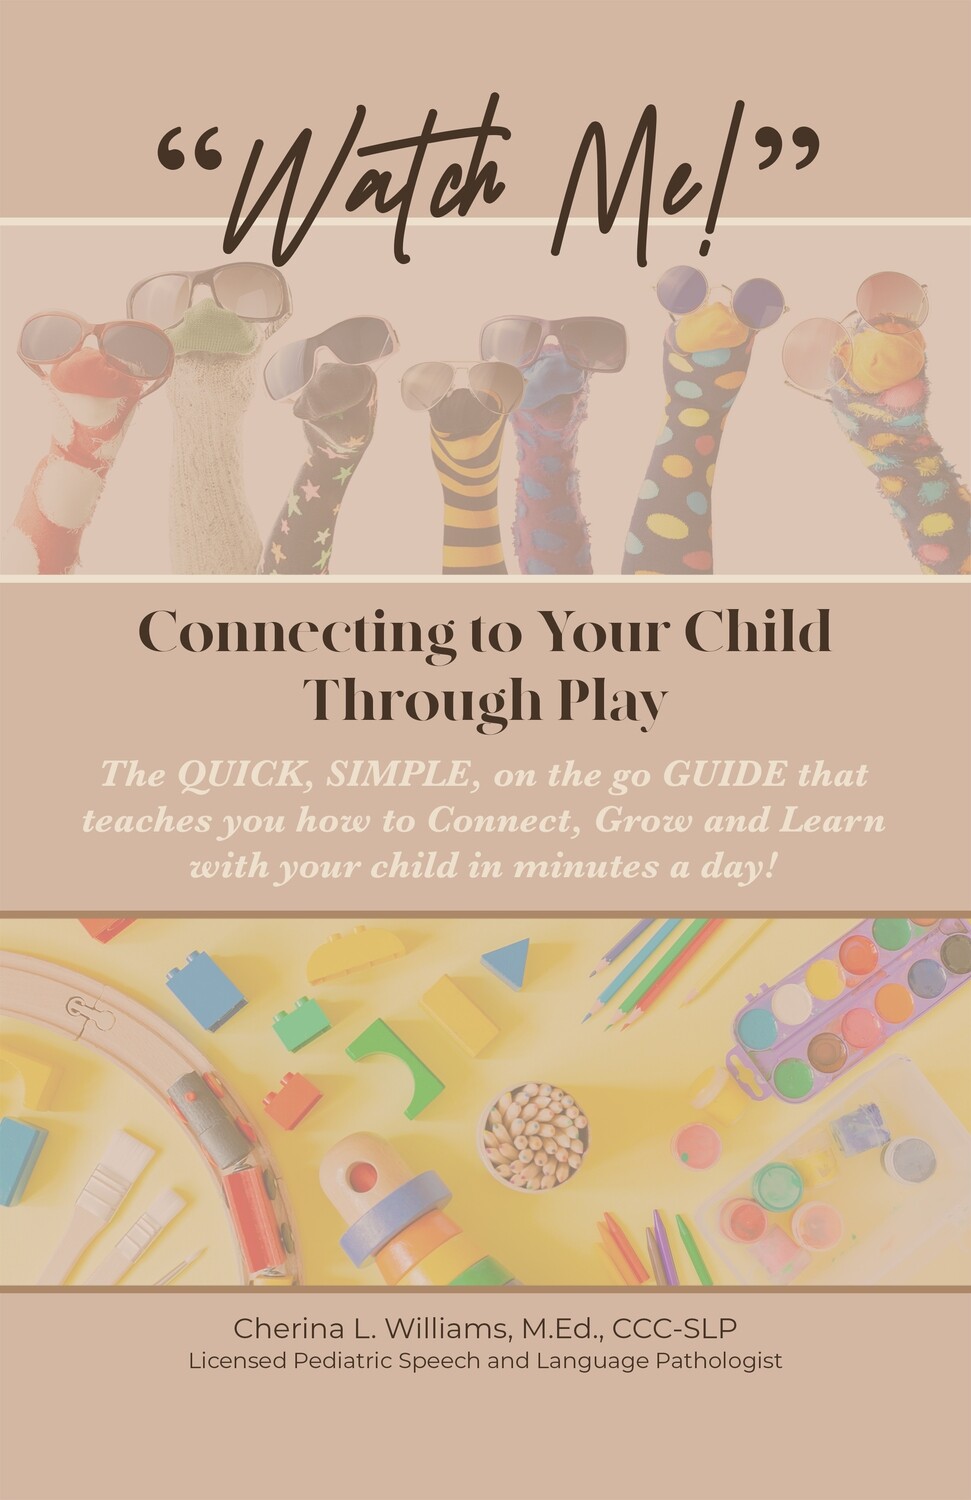 Watch Me: Connecting to Your Child Through Play